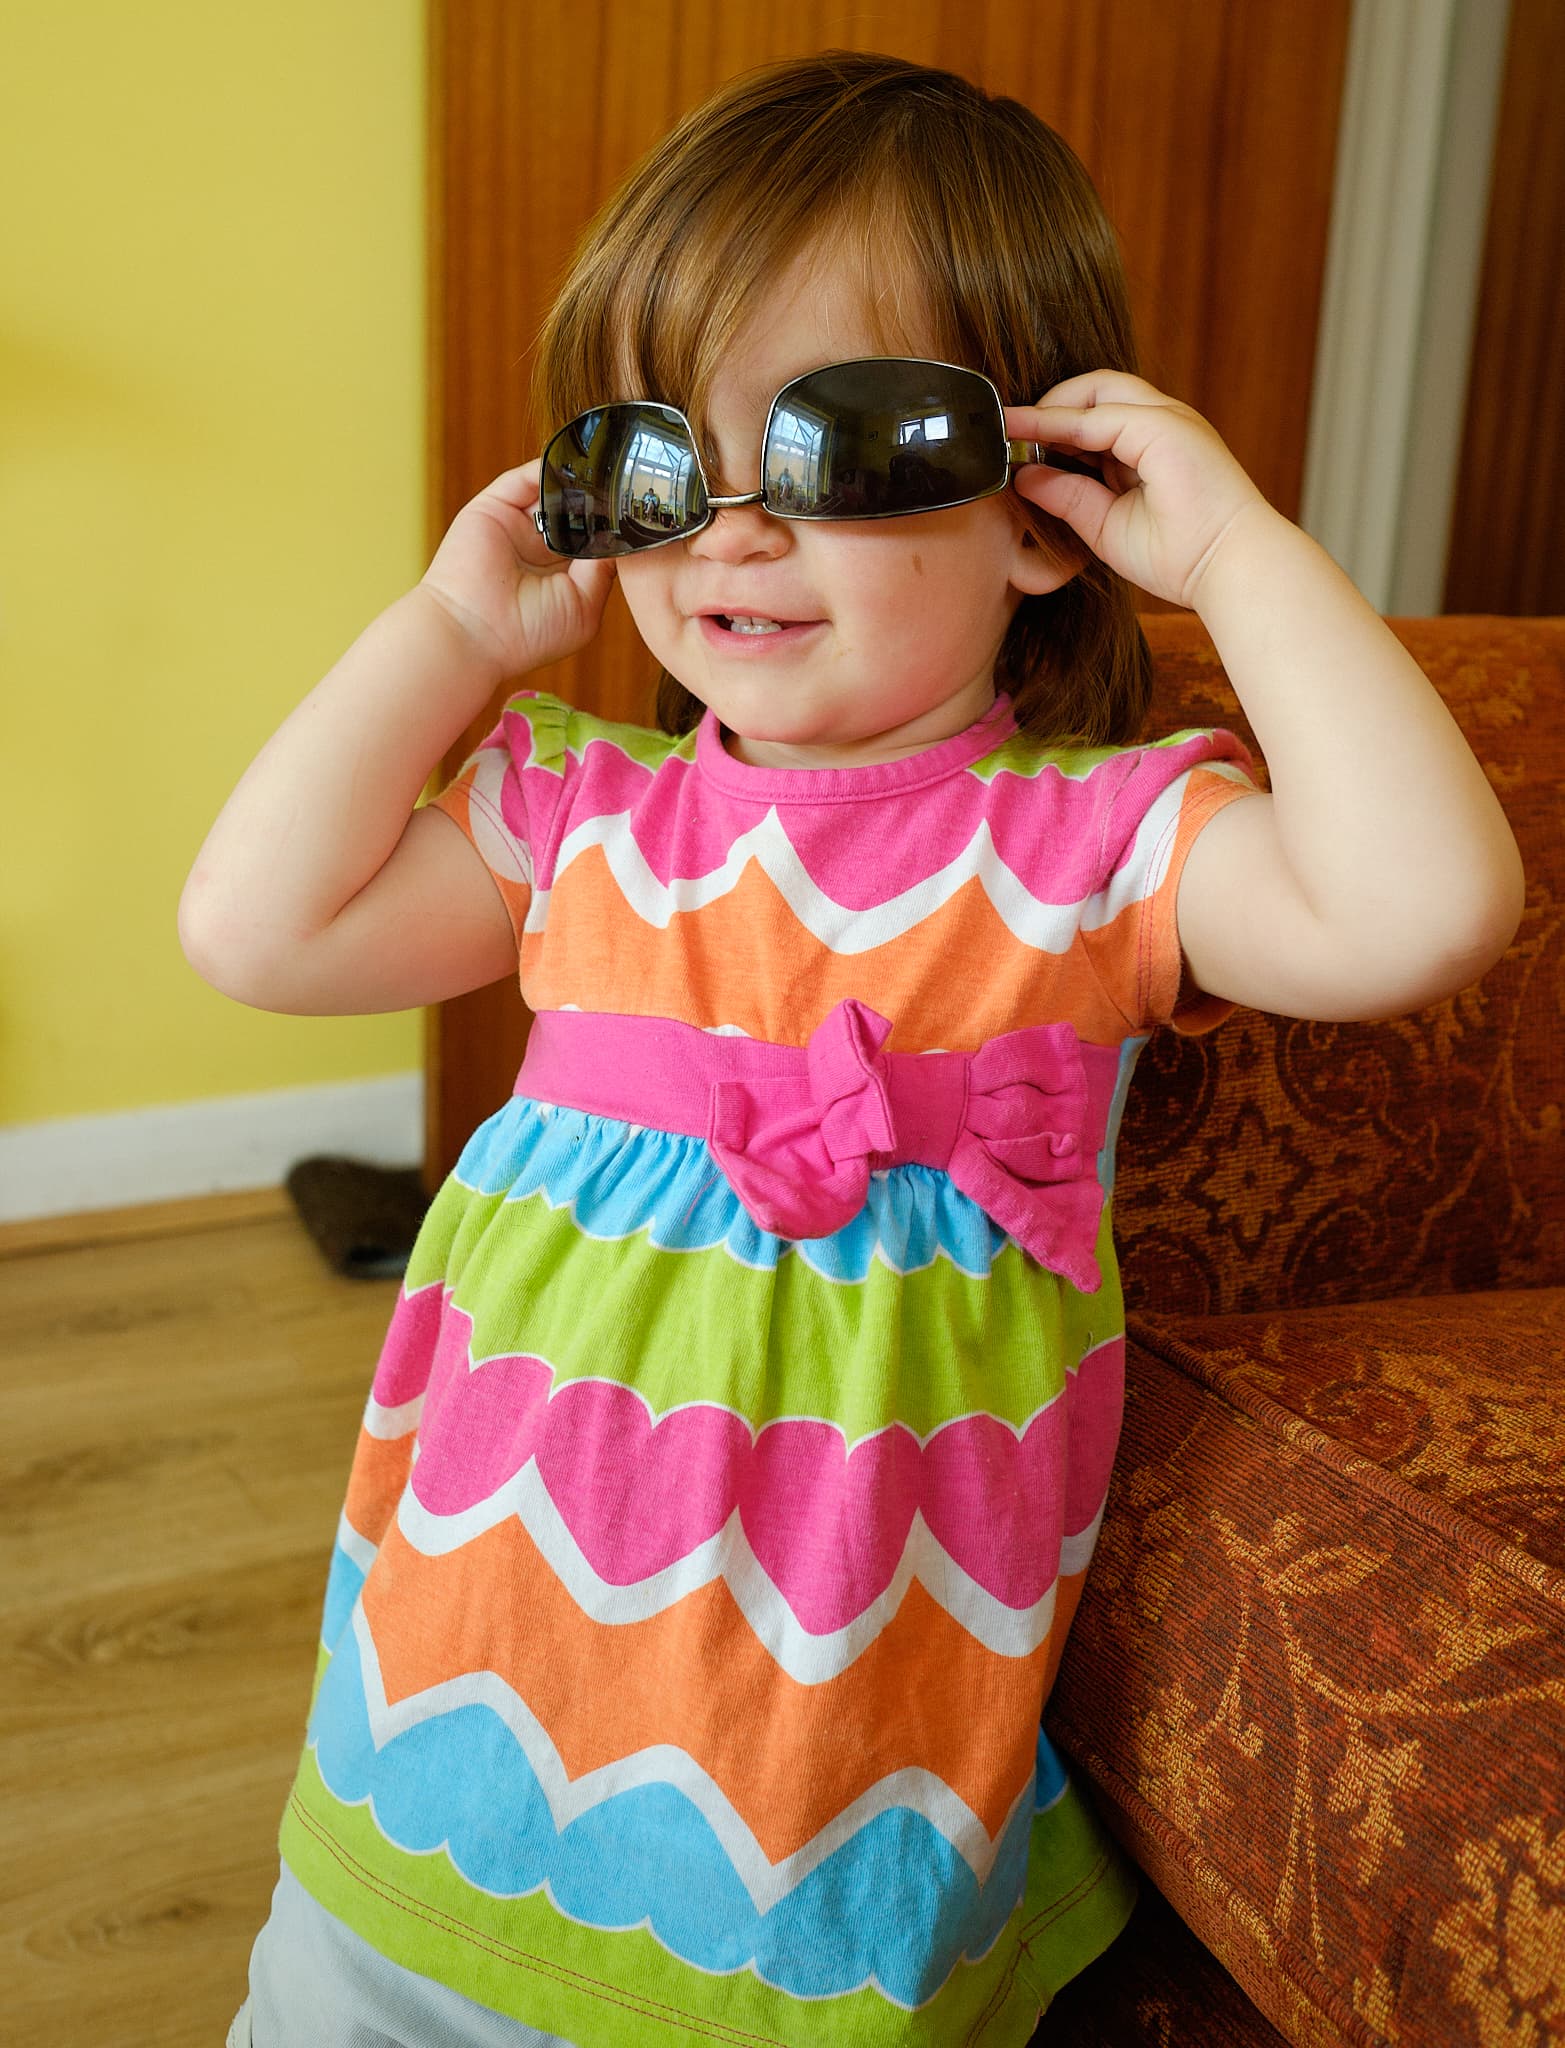 Emily in a rainbow dress trying on sunglasses